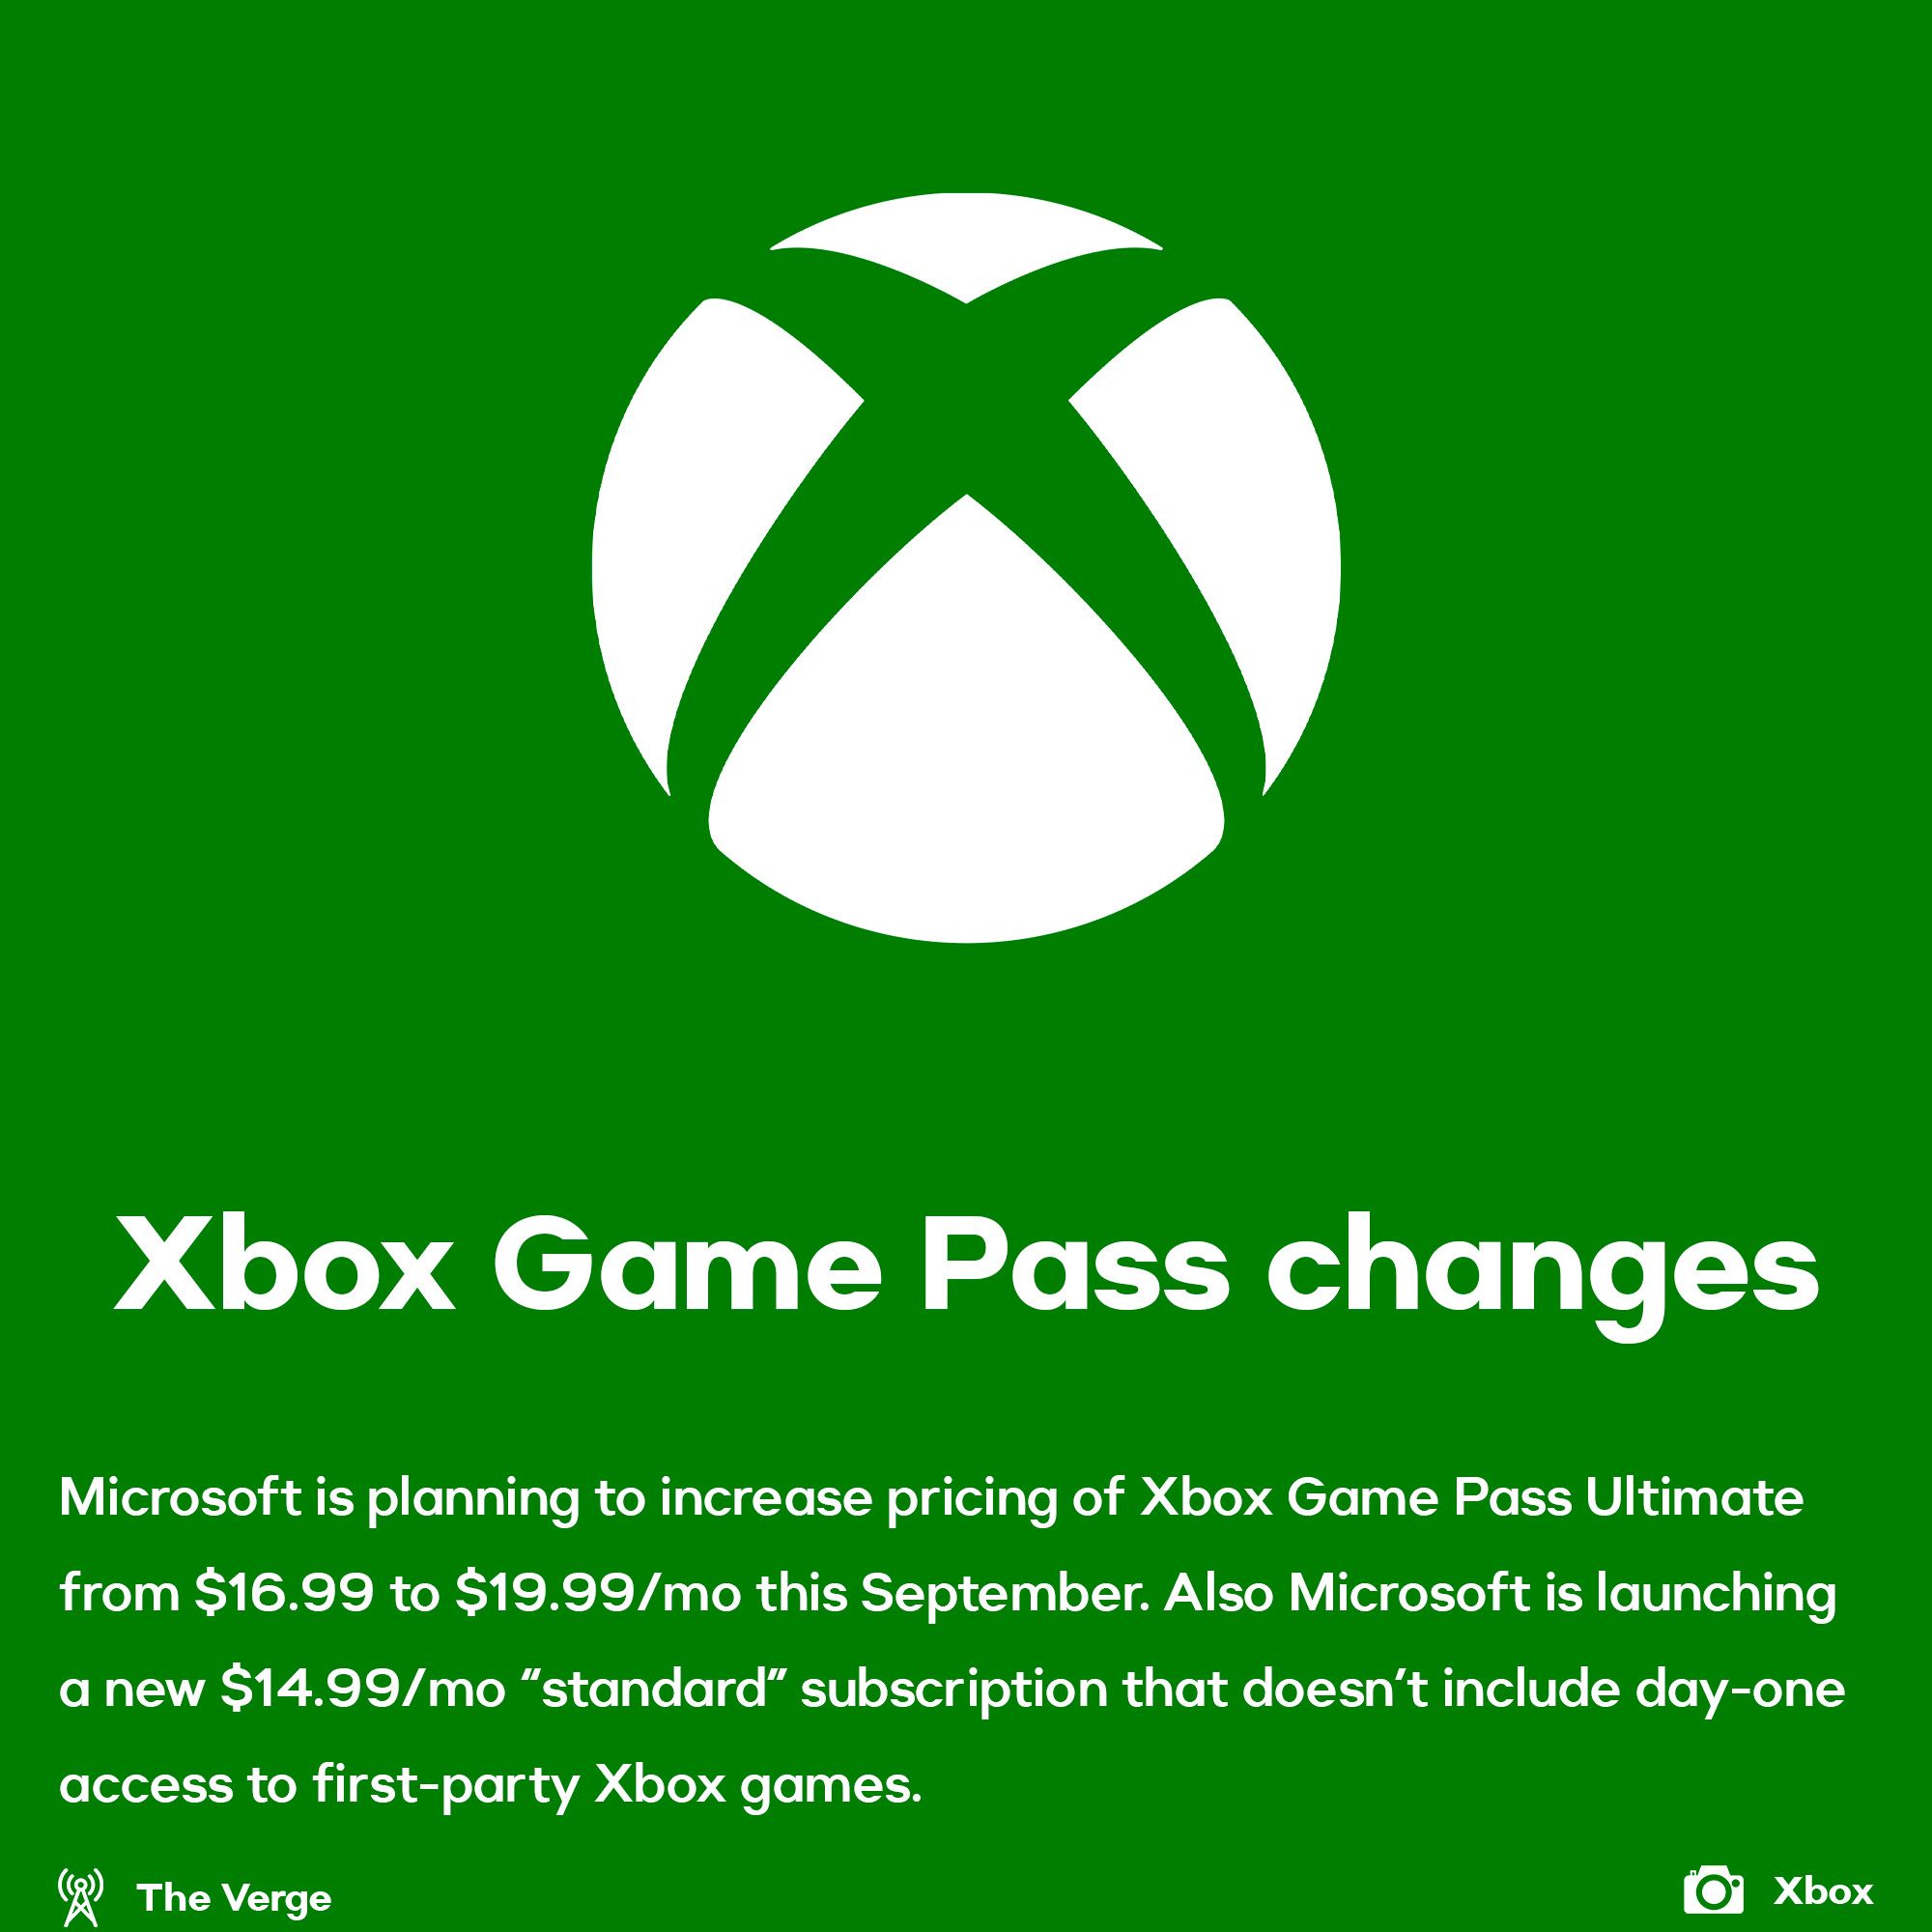 Xbox Game Pass changes